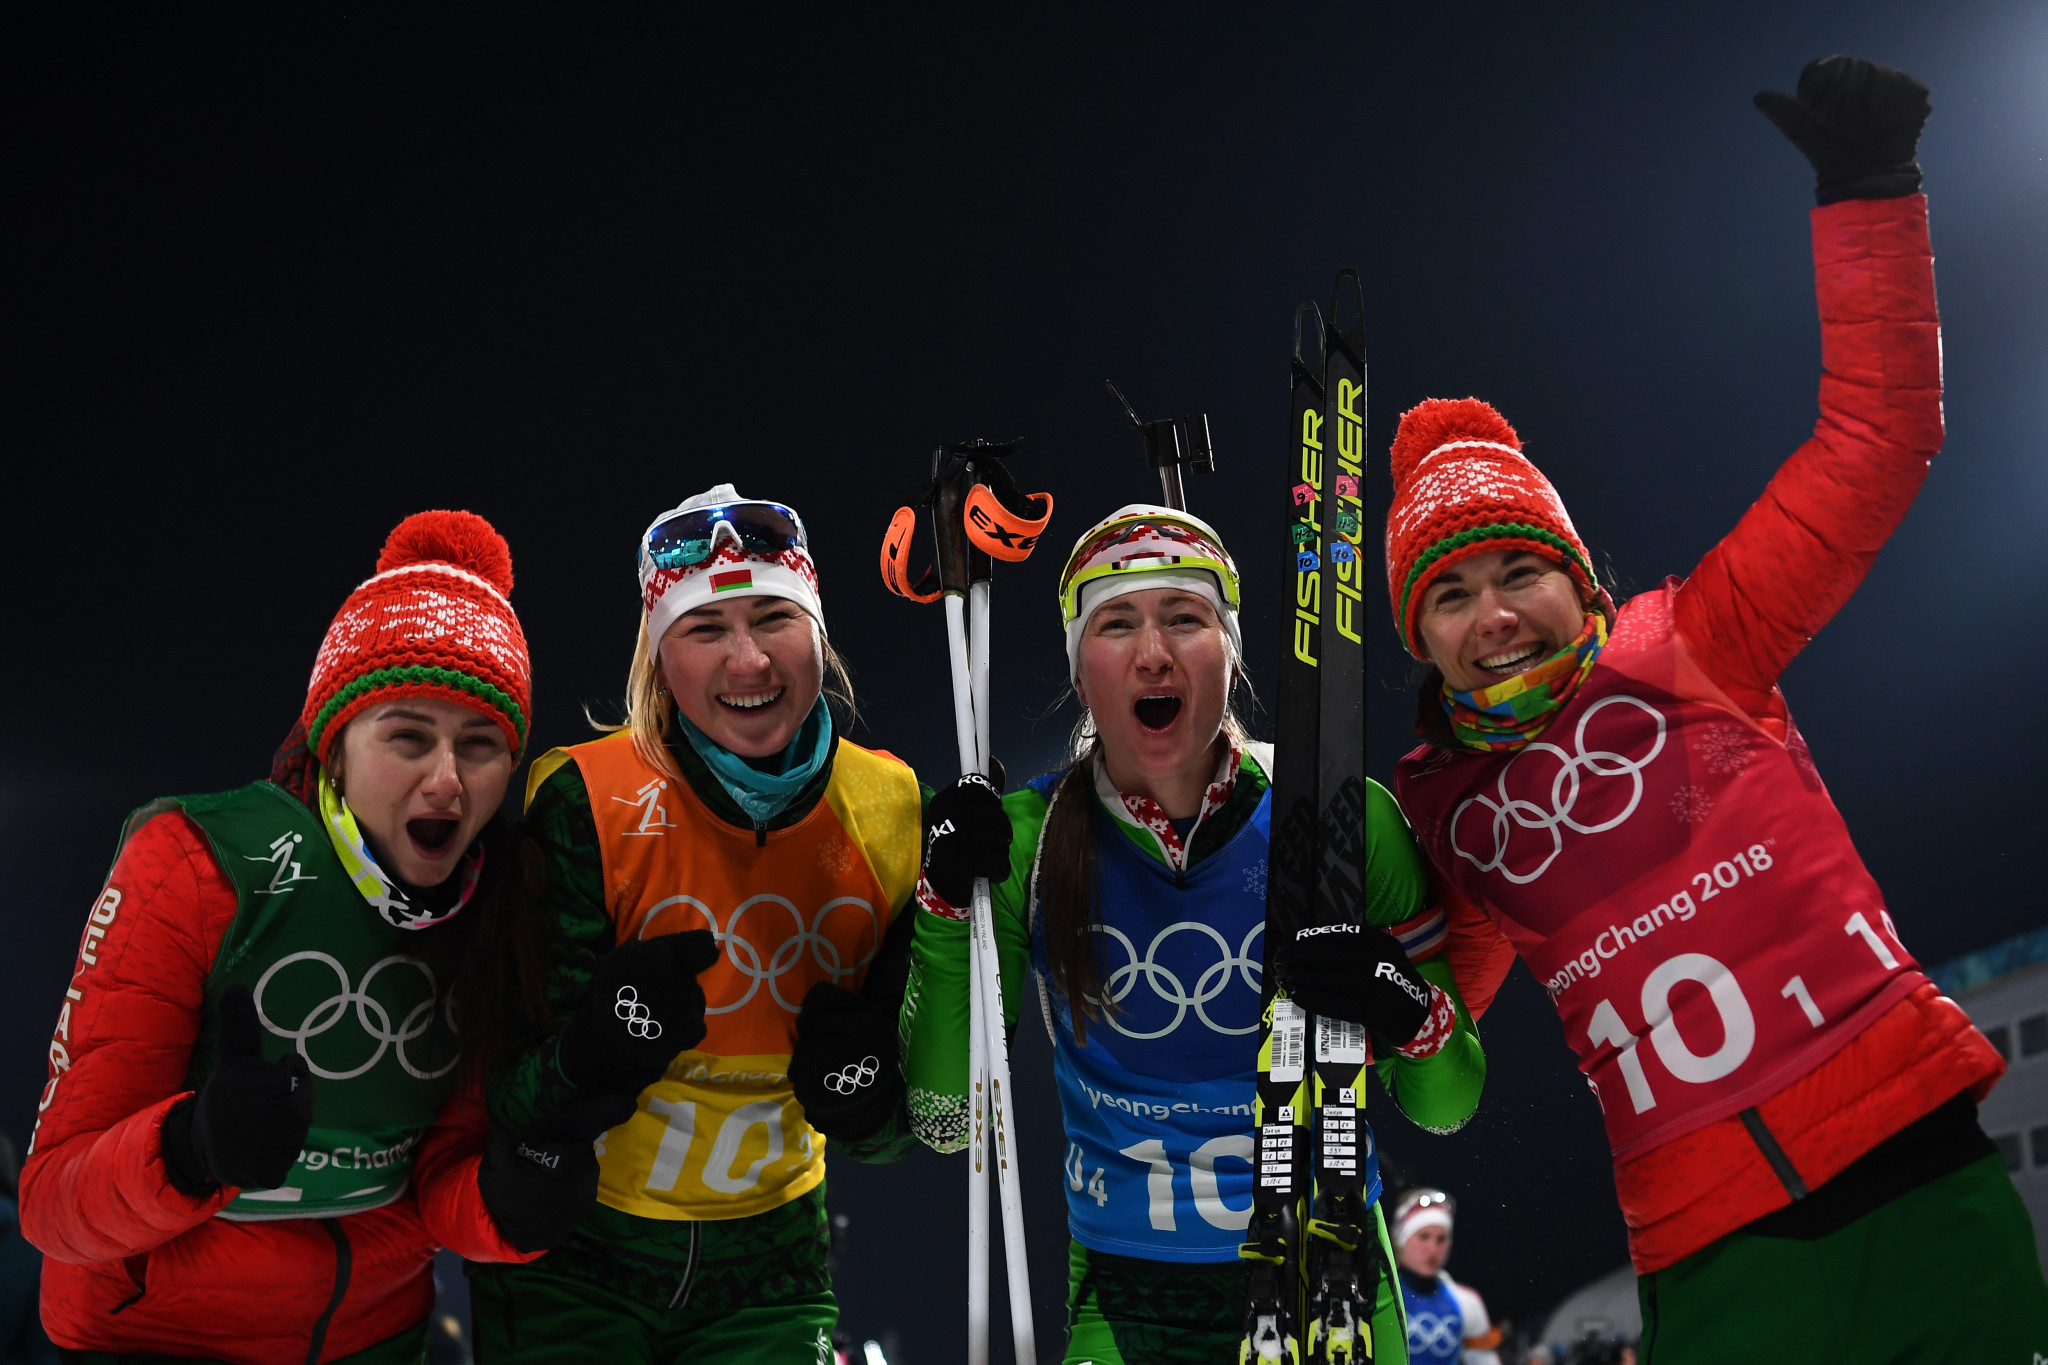 The victory for Belarus was the country's first in the women's relay at the Winter Olympics ©Getty Images